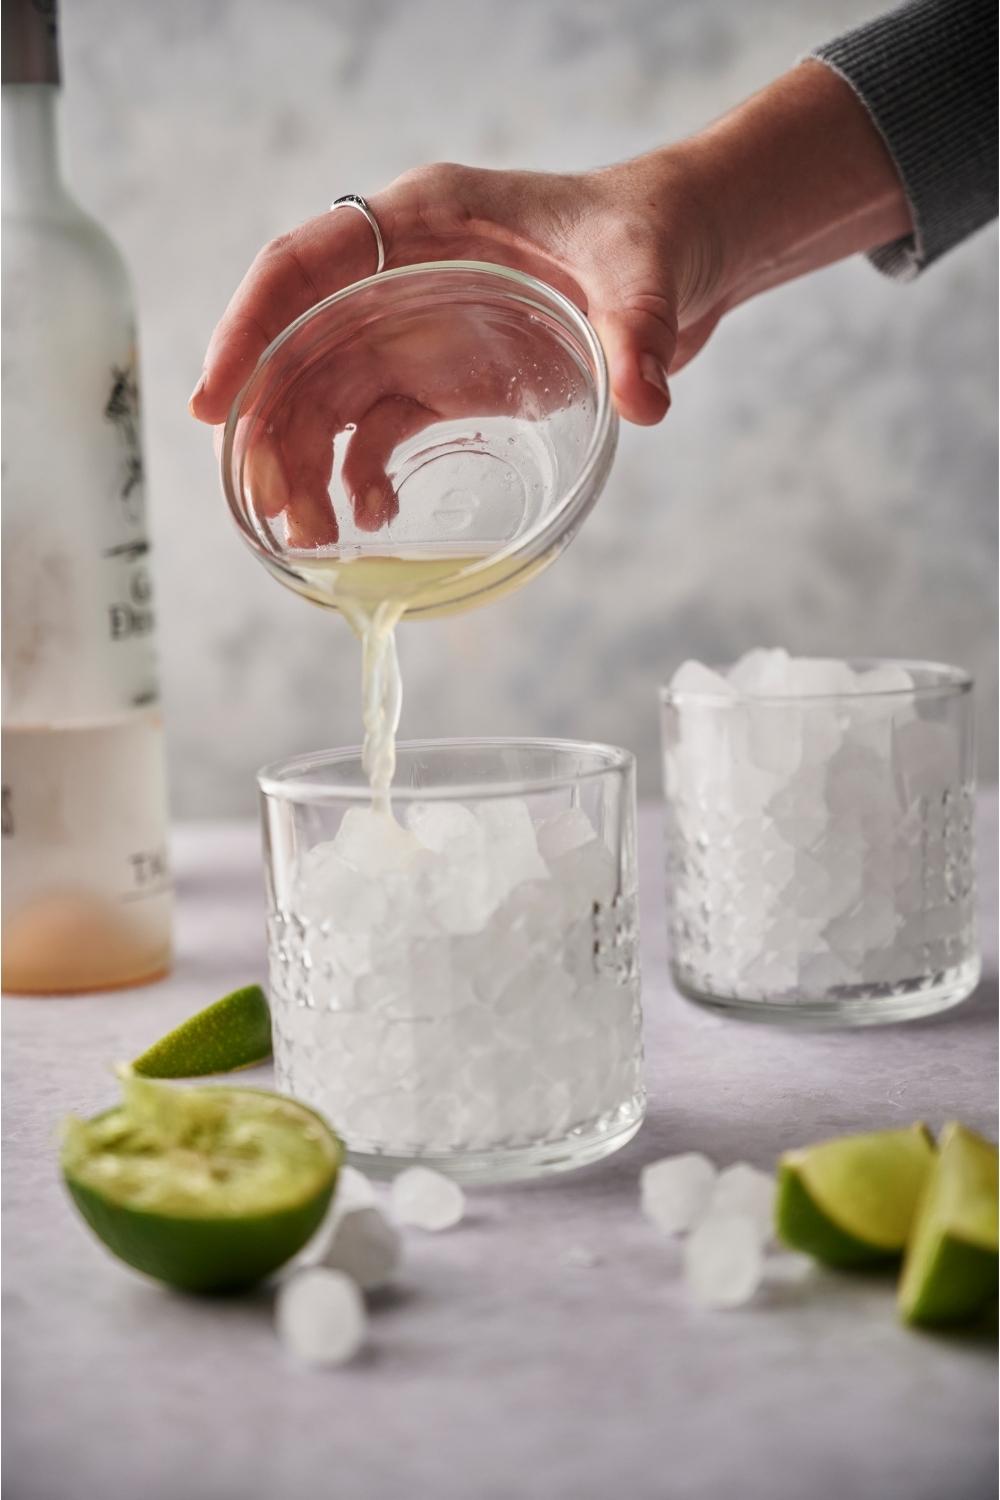 A hand pouring fresh lime juice into a glass of ice next to ice cubes and juiced lime halves.